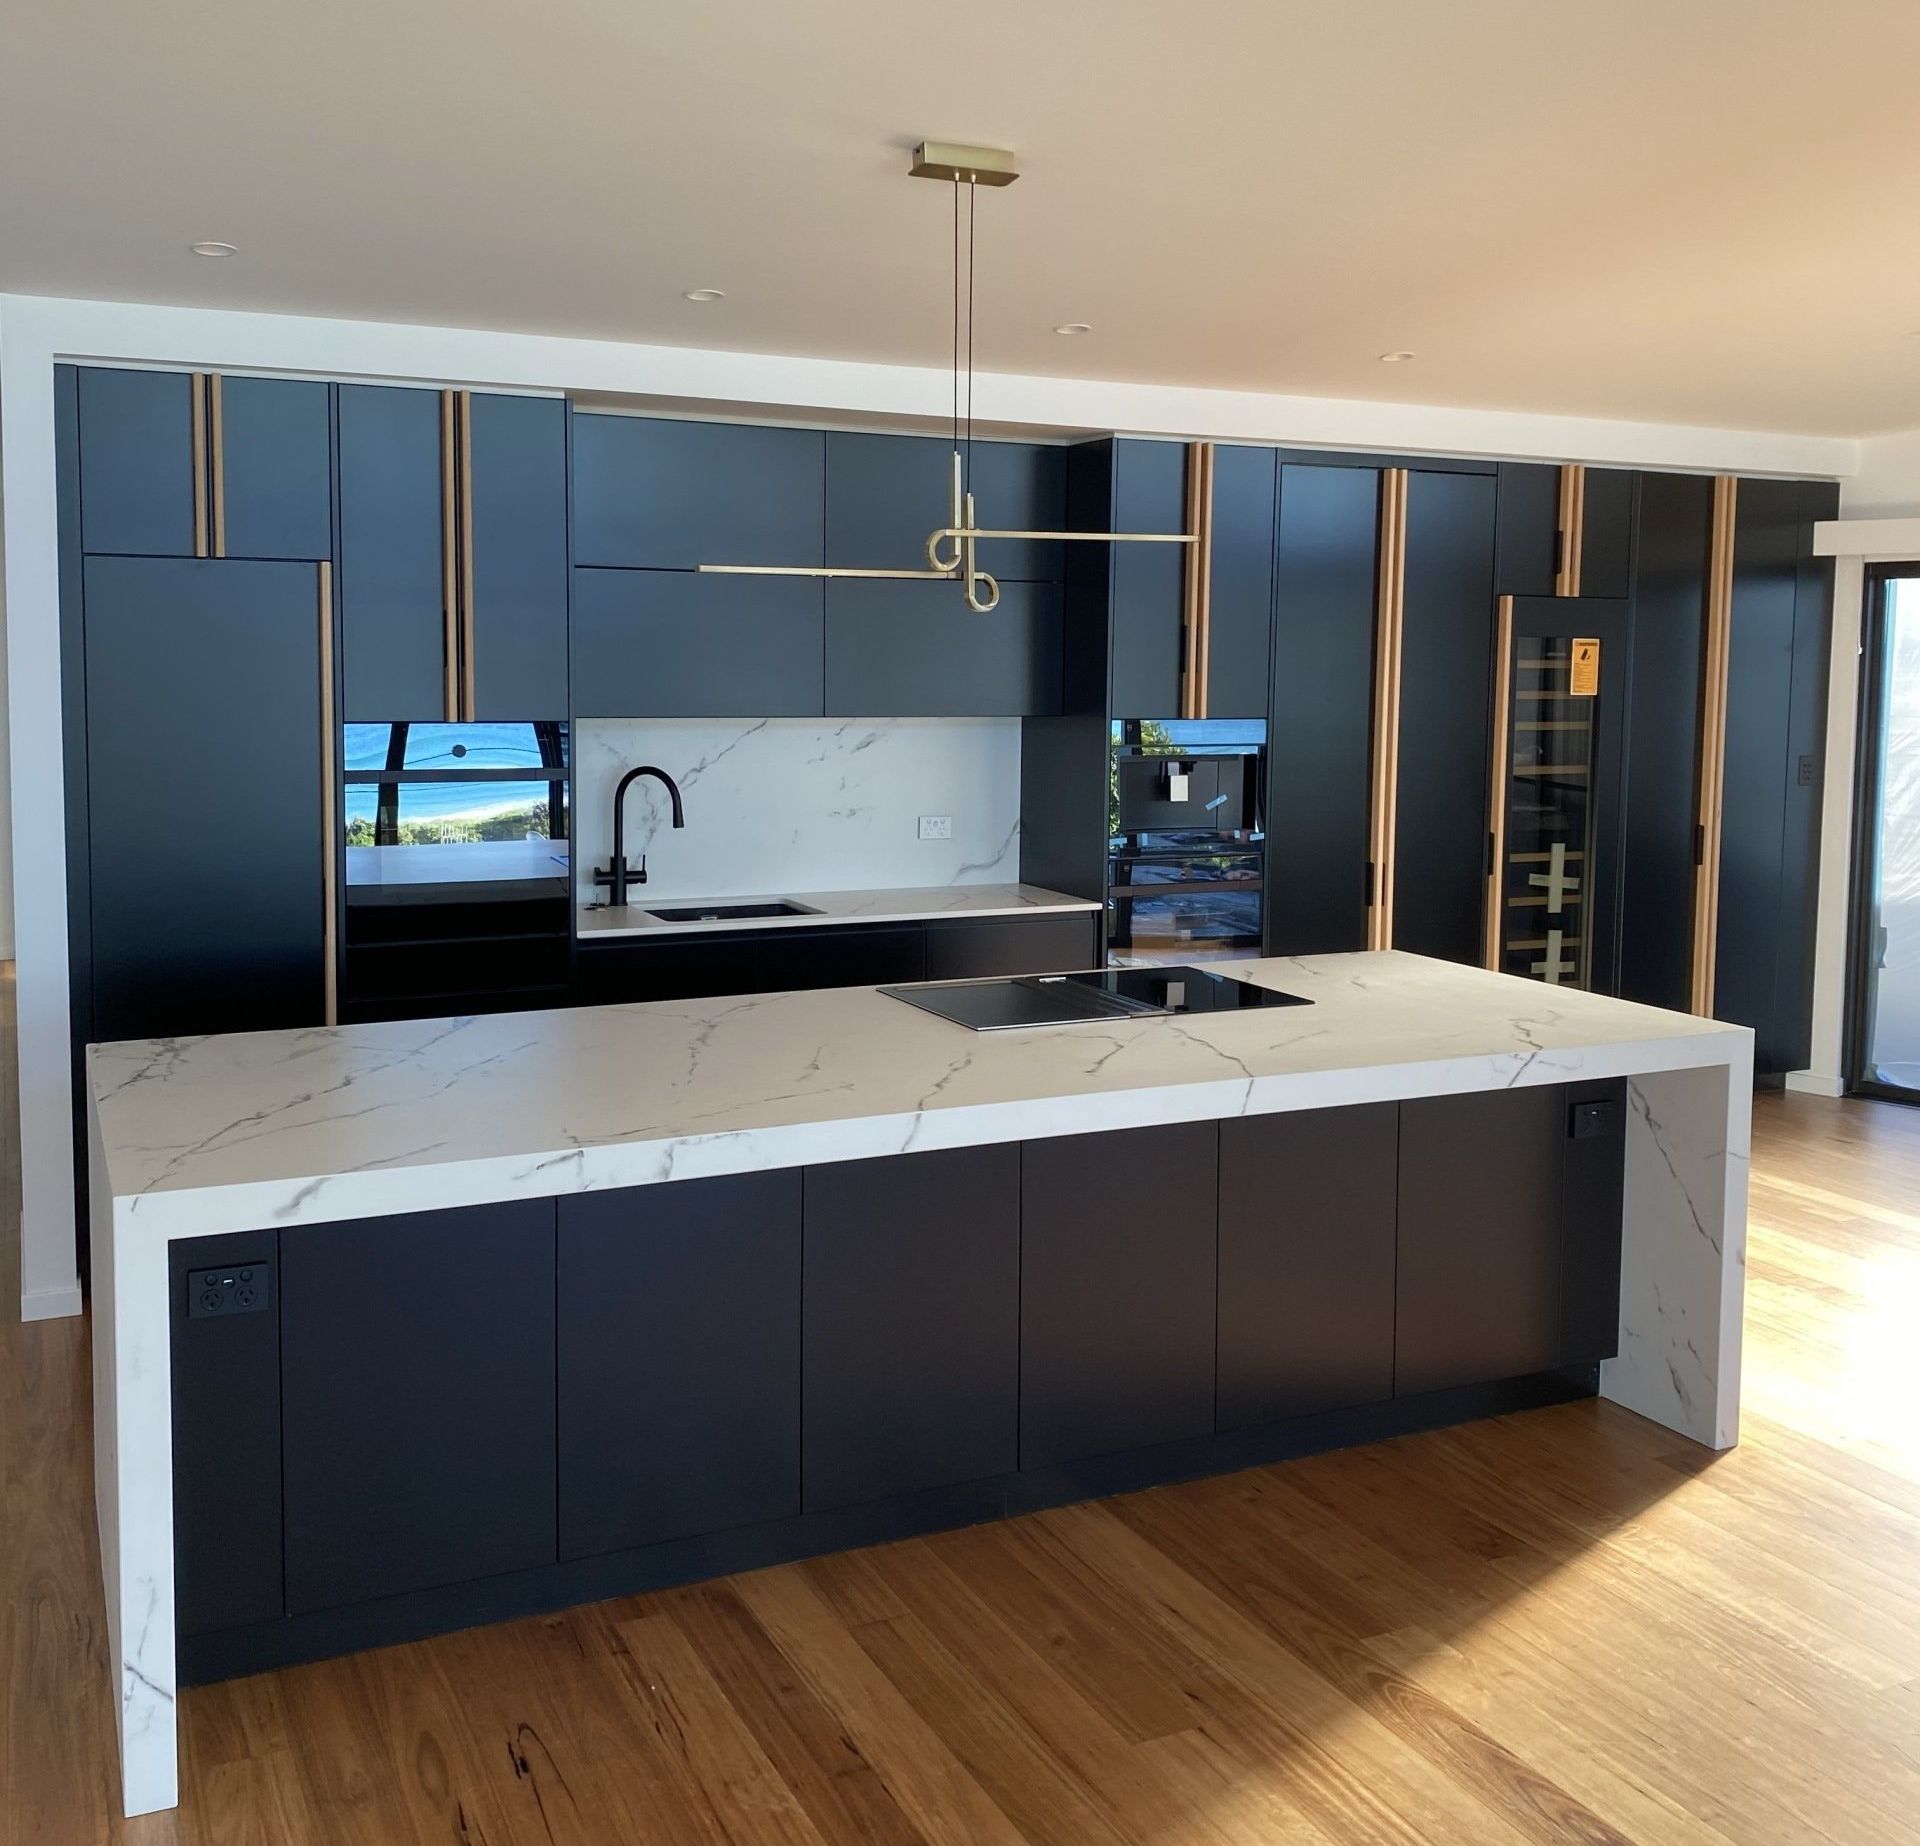 Black Color Of The Kitchen With Wooden Floor - Renovation Specialist in Forster, NSW